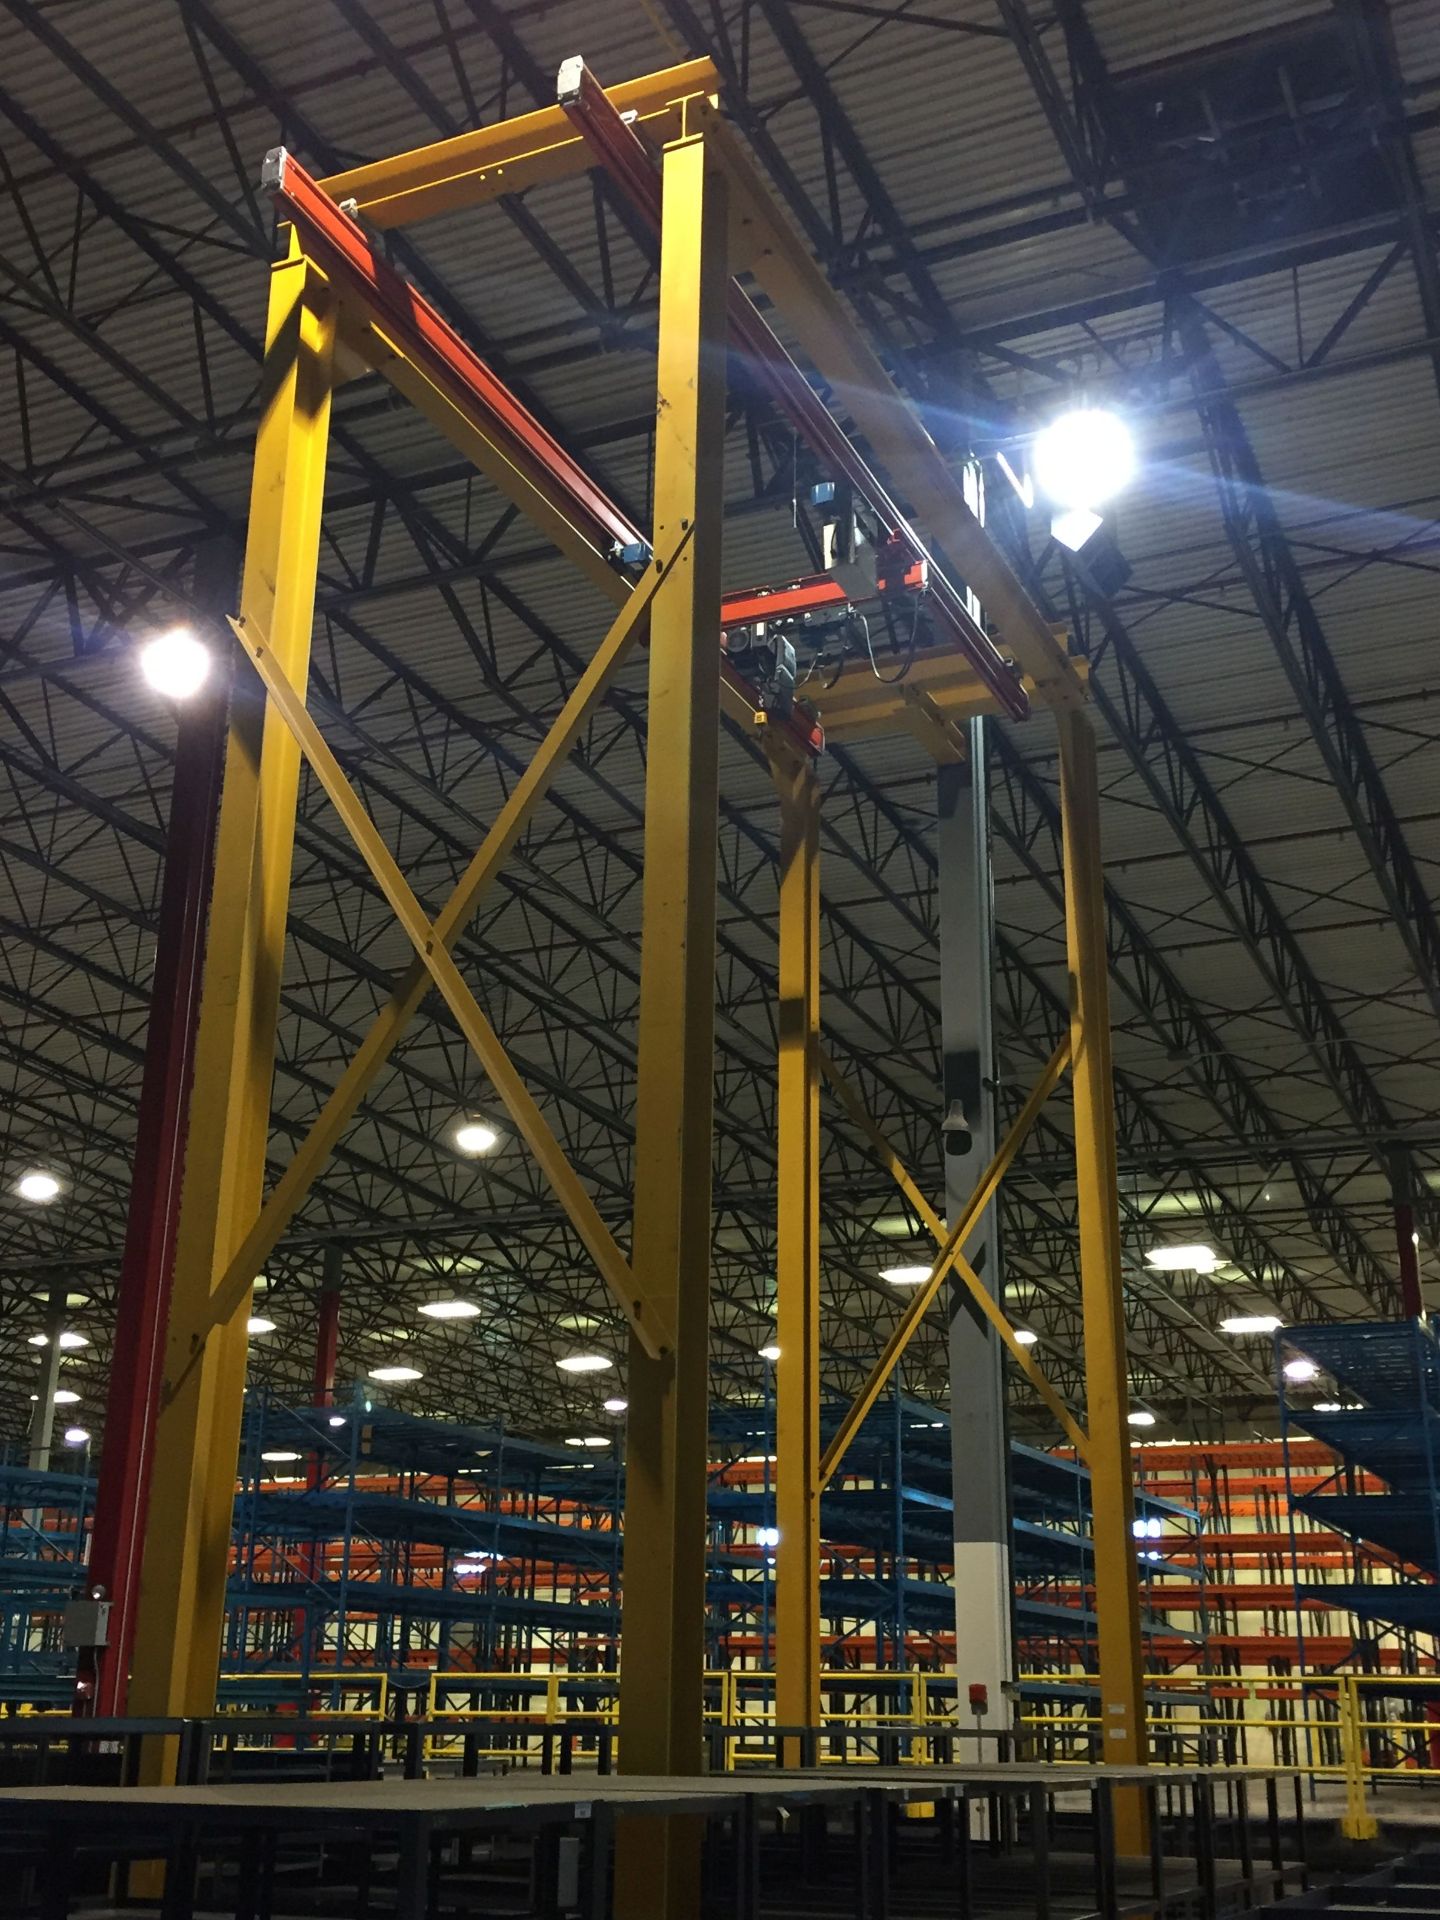 2,200 LB. CAPACITY DEMAG FREE STANDING REMOTE CONTROL CHAIN HOIST CRANE SYSTEM (APPROX.) 8' X 23' - Image 3 of 3